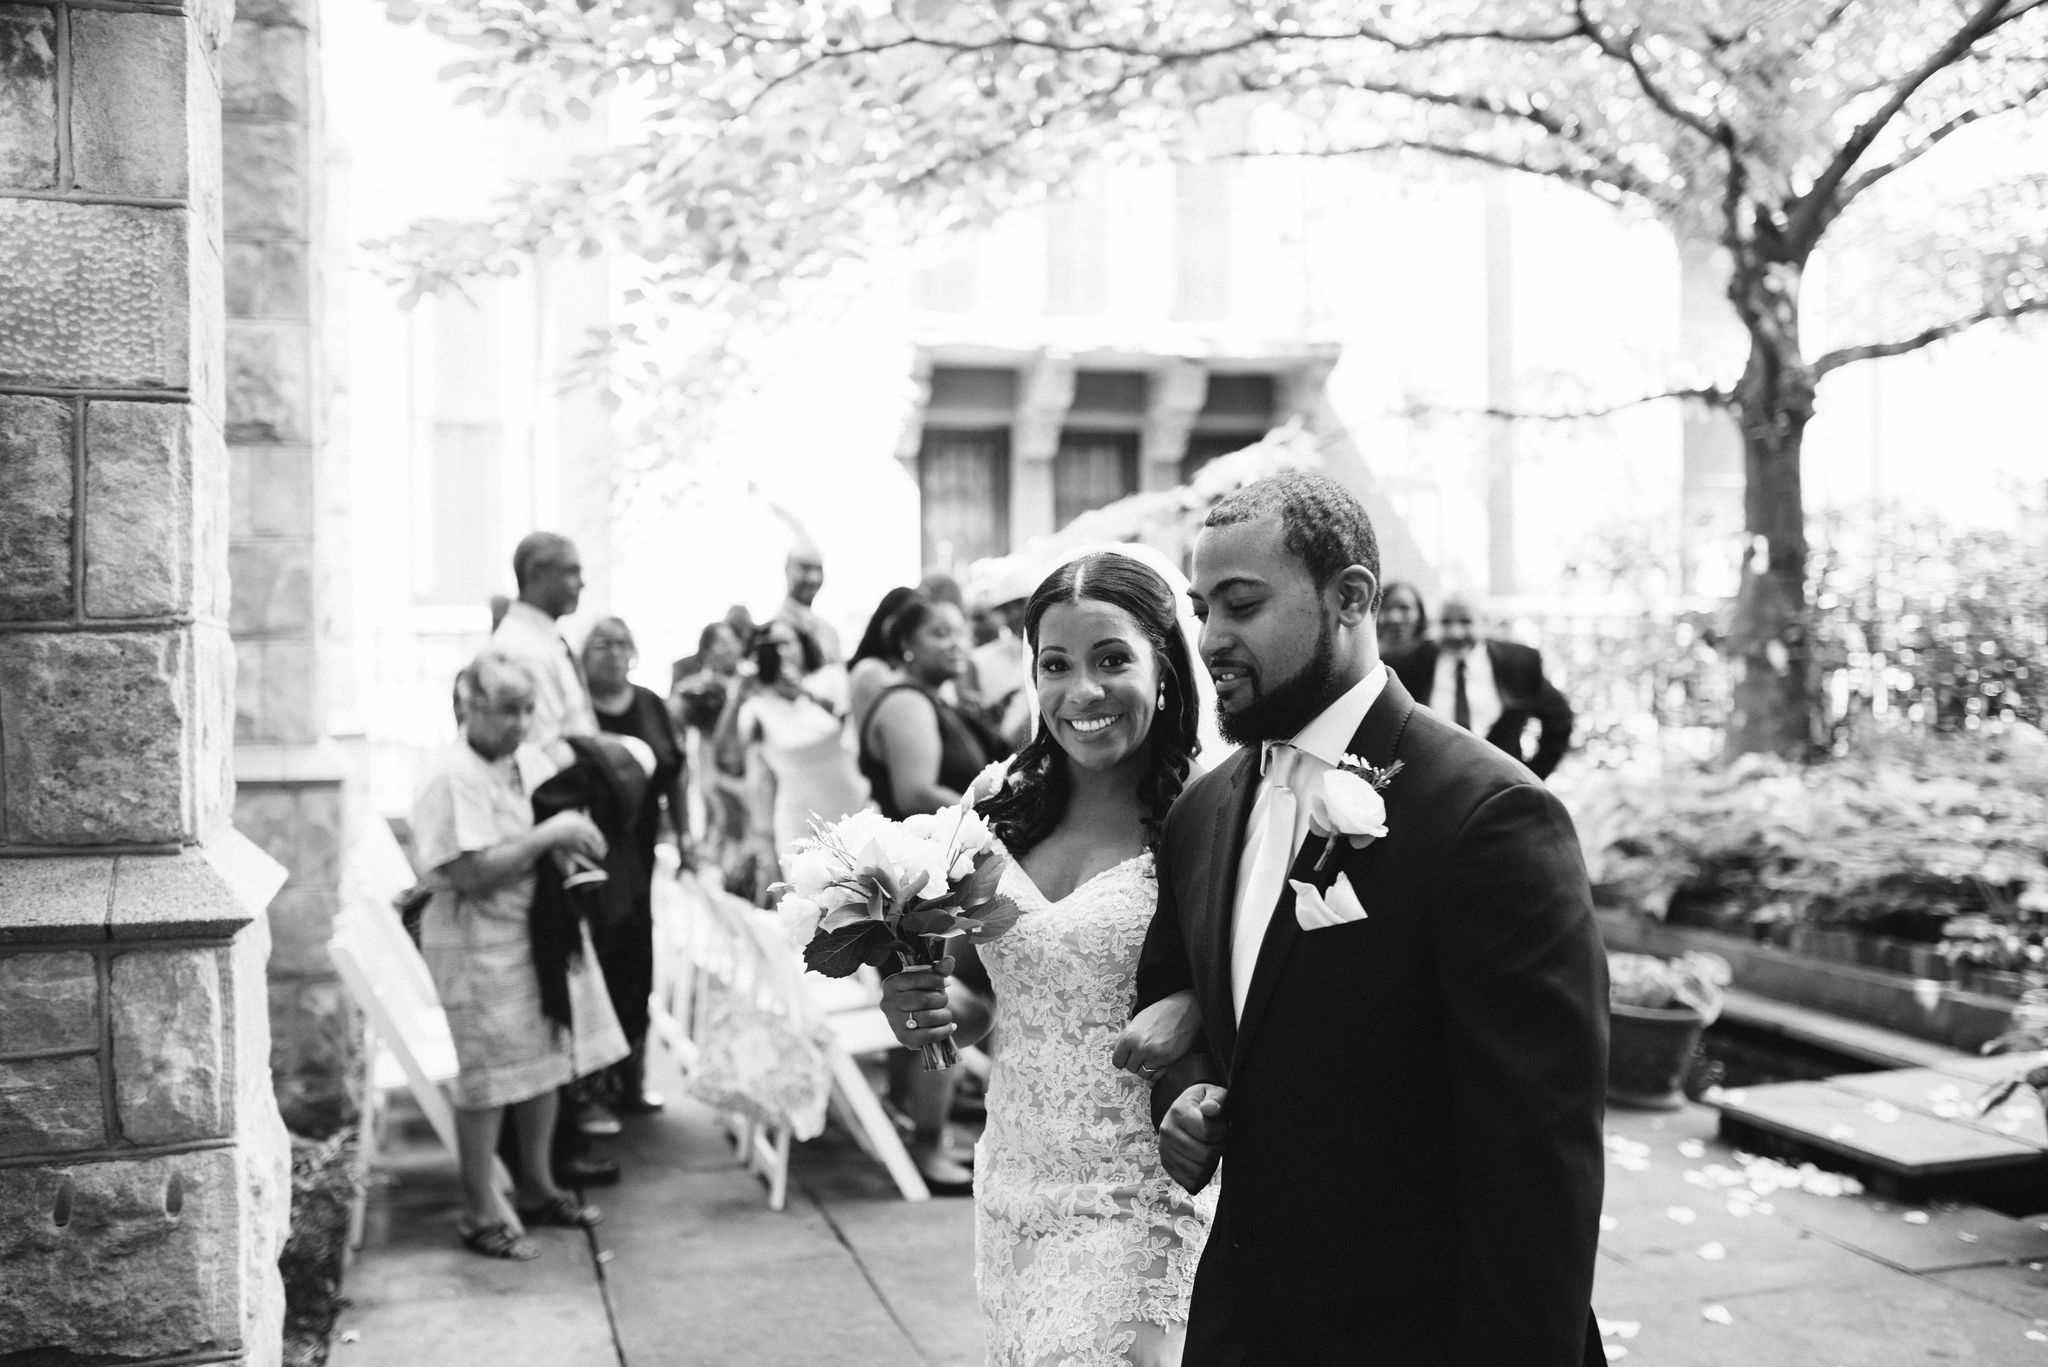  Baltimore, Maryland Wedding Photographer, Mount Vernon, Chase Court, Classic, Outdoor Ceremony, Garden, Romantic, Bride and Groom Walking Down Aisle After Ceremony, Just Married, Black and White Photo 